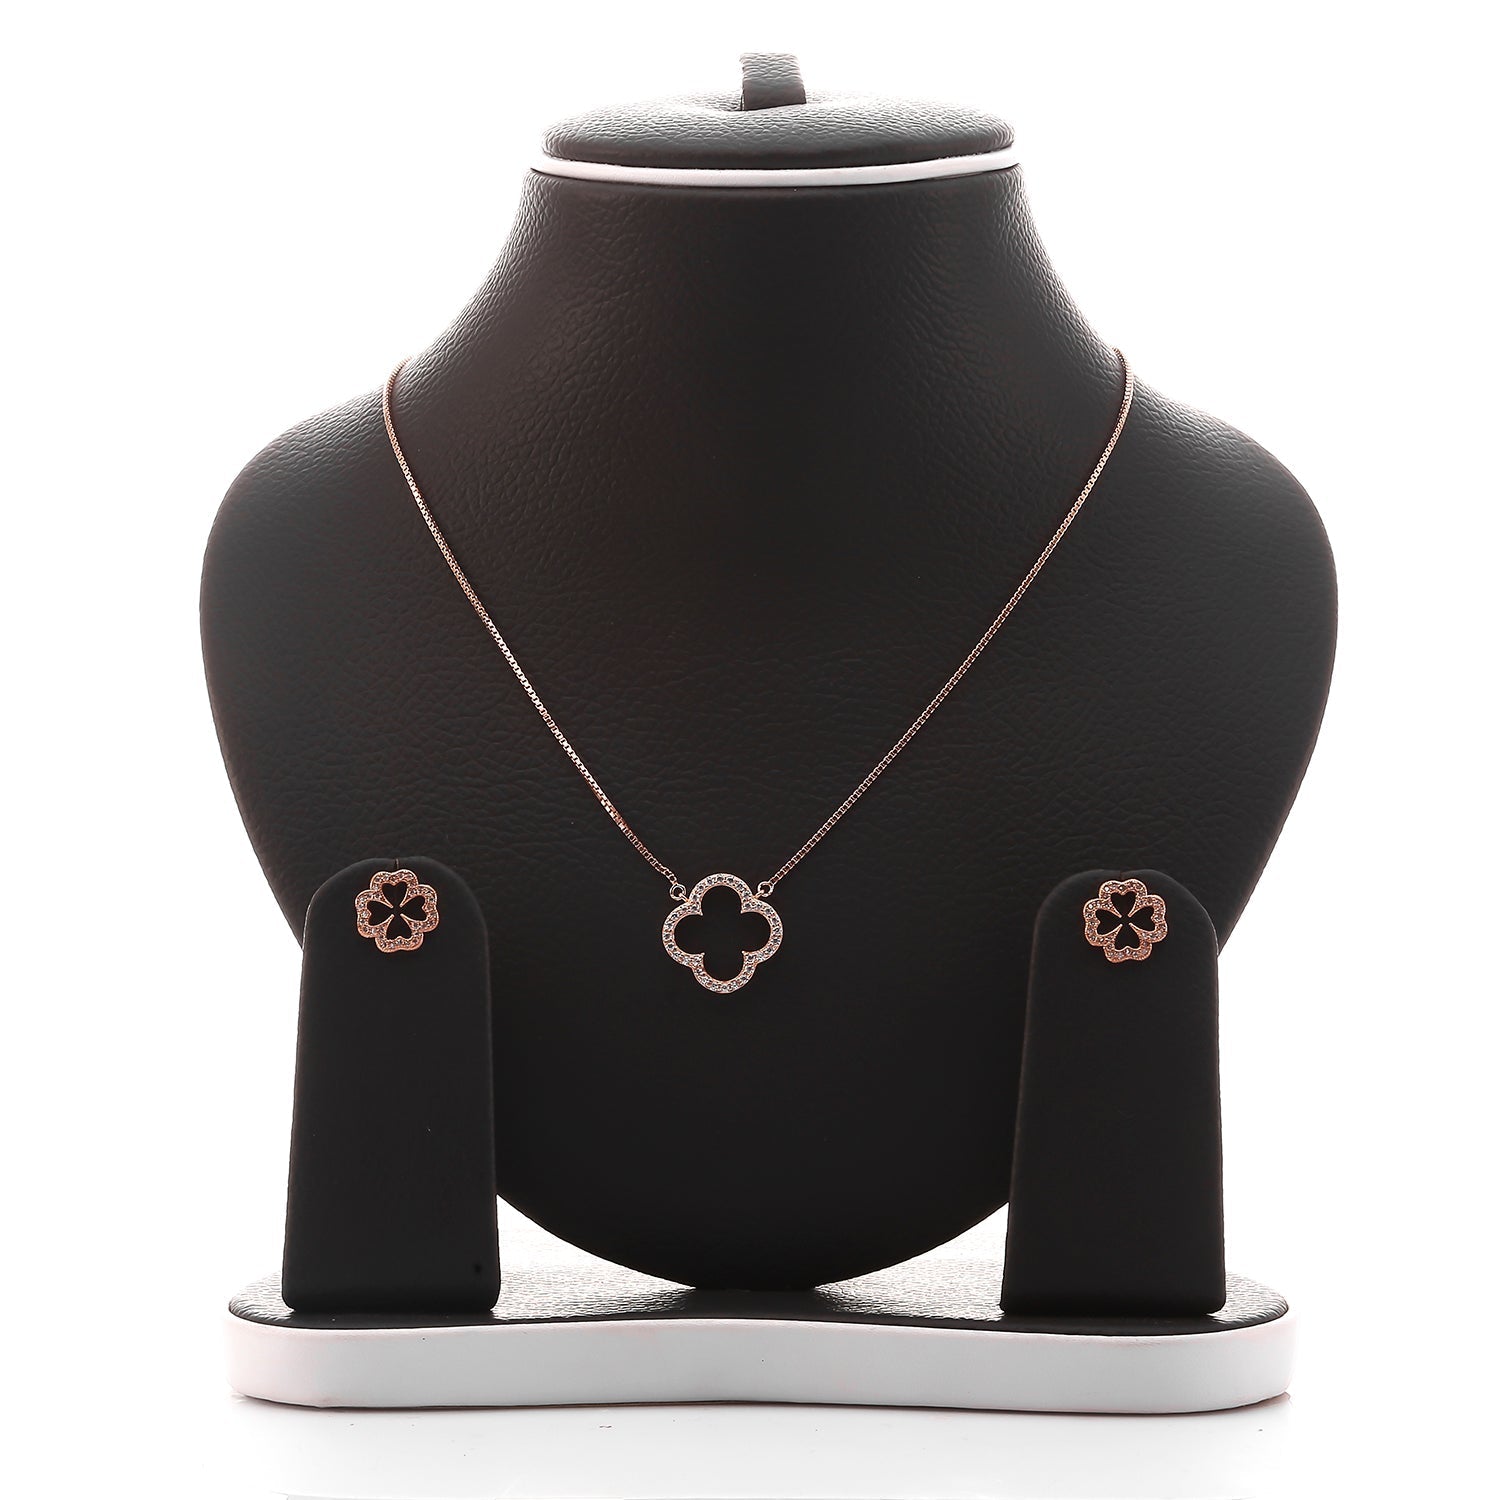 Sparkling Clover Pendant Necklace and Earrings Set - ARJW1022RG ARCADIO